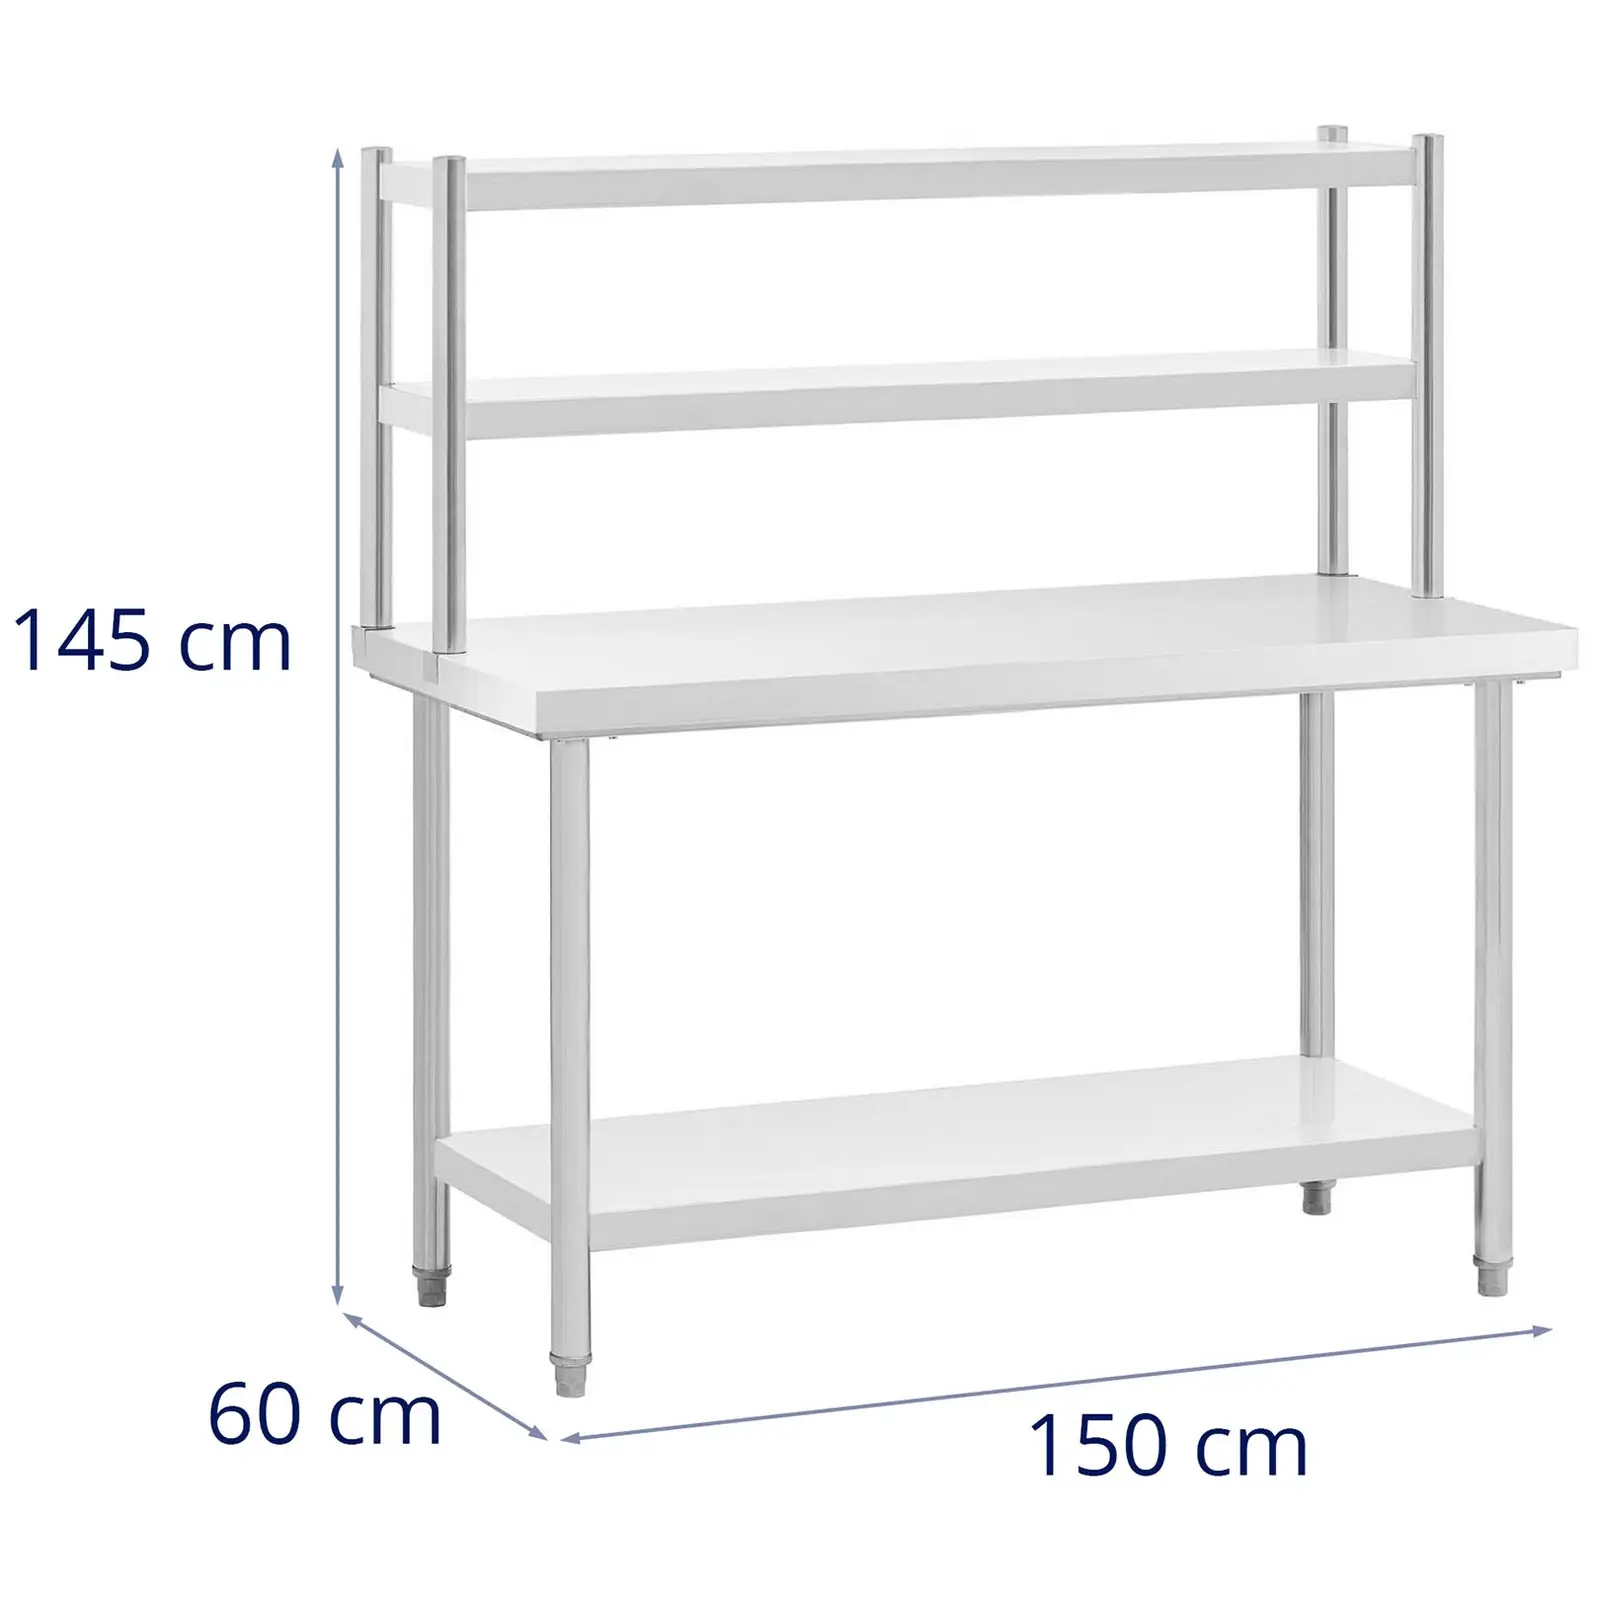 Stainless Steel Table With Shelves - 150 x 60 cm - 300 kg - Royal Catering